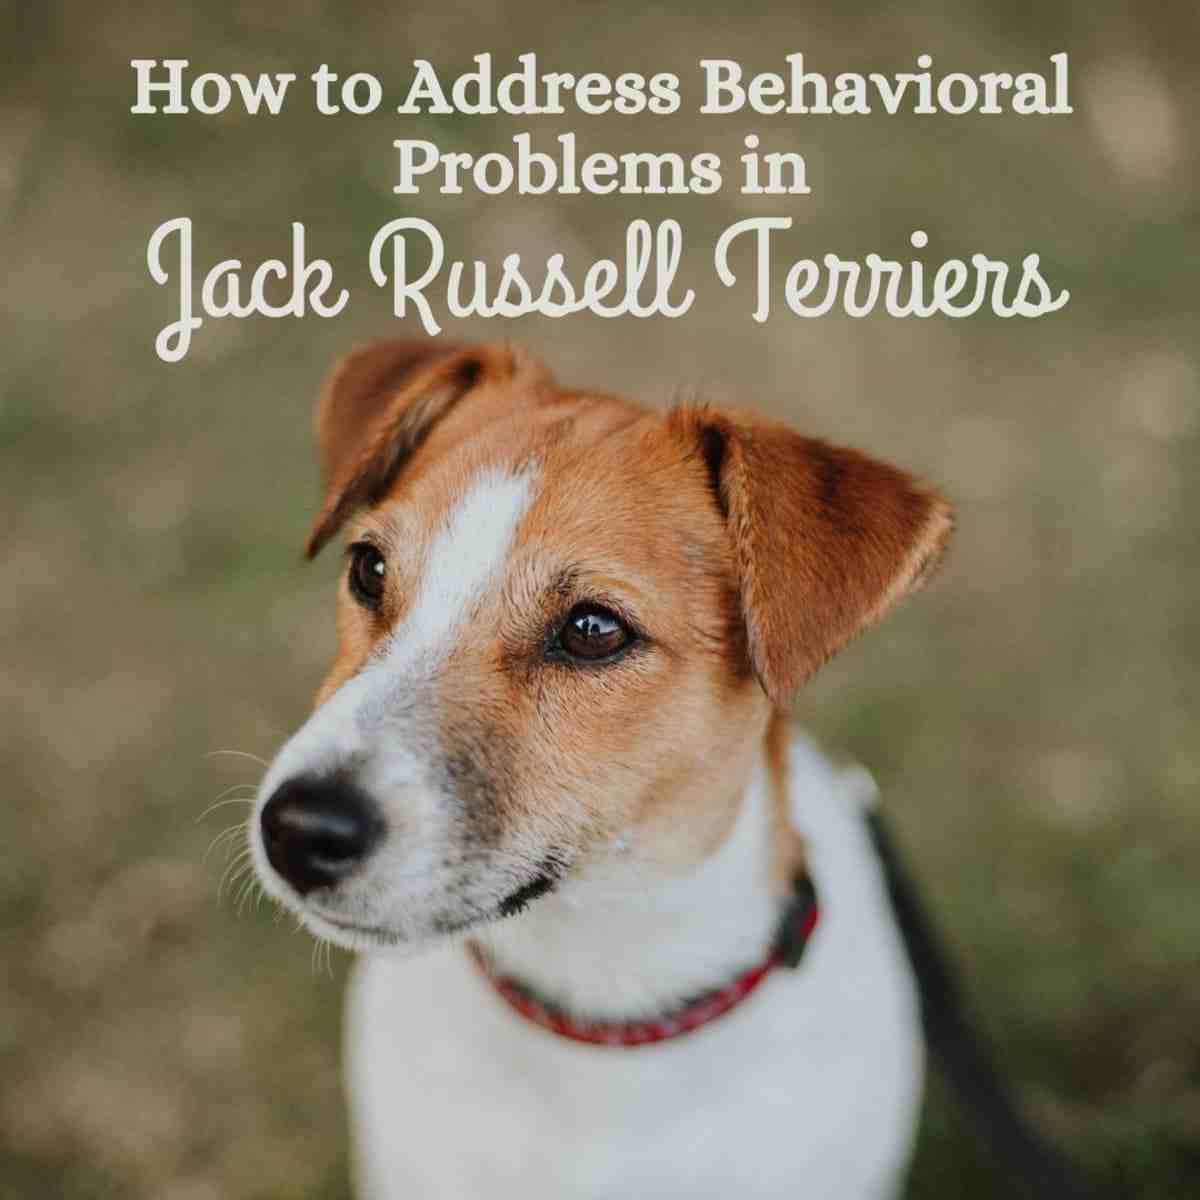 Are Jack Russells aggressive with other dogs?